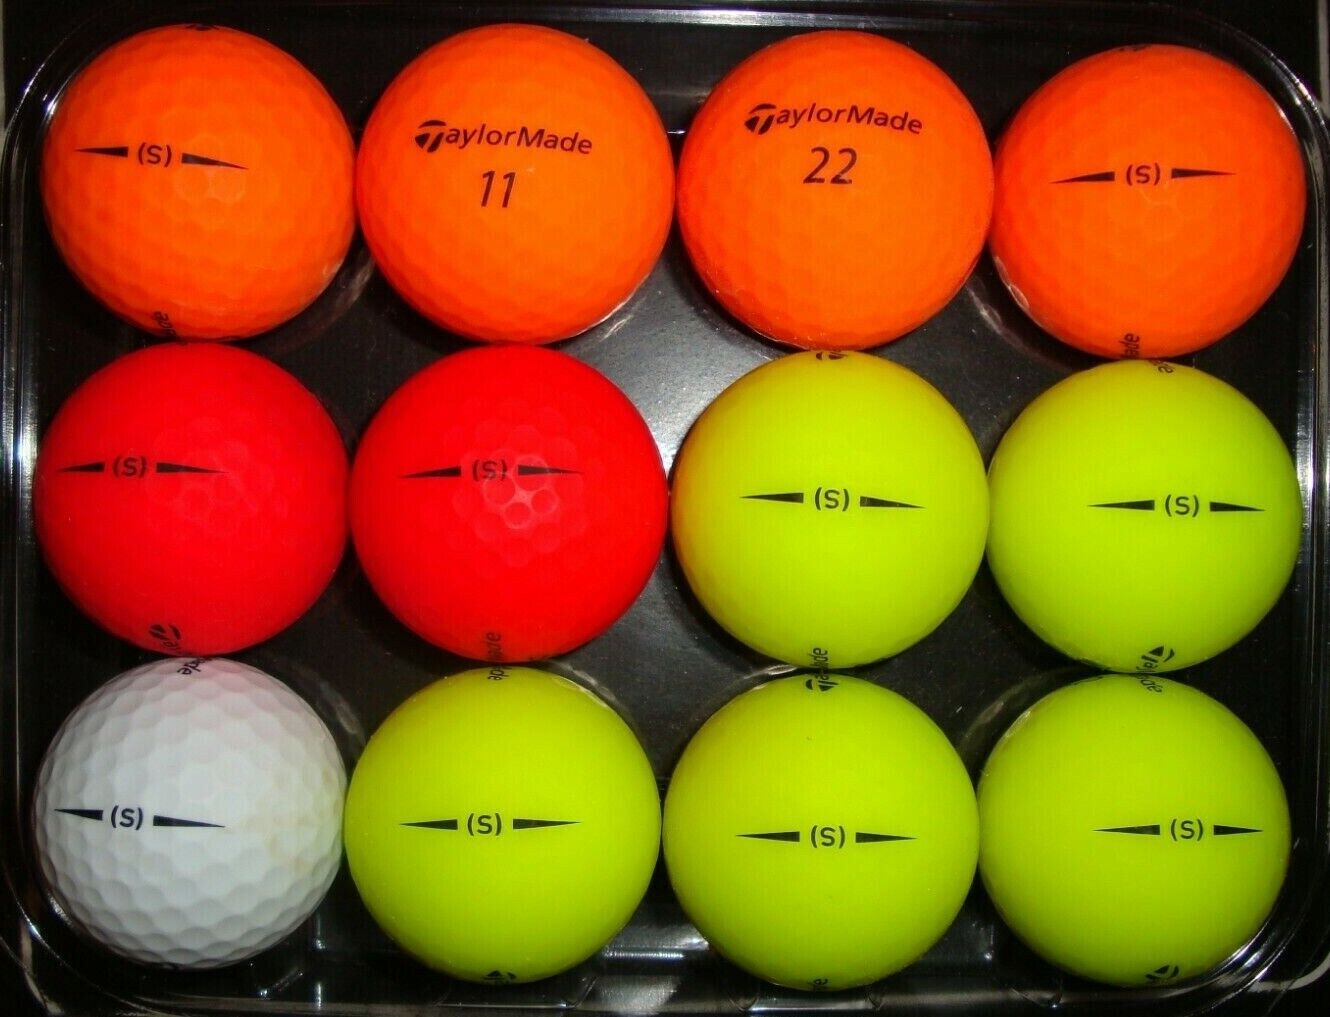 12 Taylormade (s) Matte multicolored used golf balls 